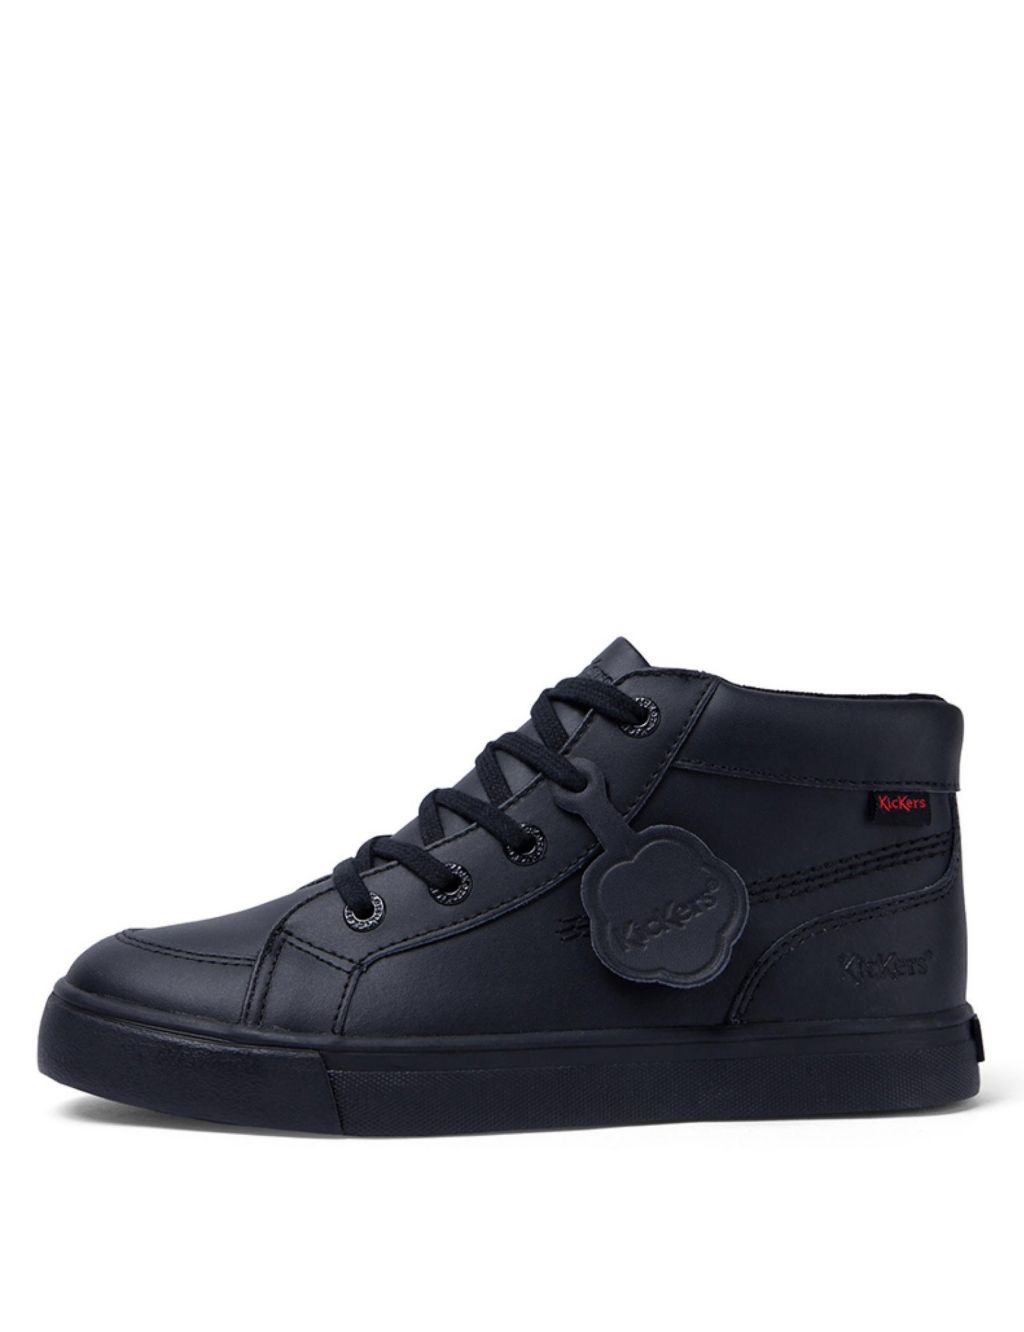 Kids' Leather High Top School Shoes